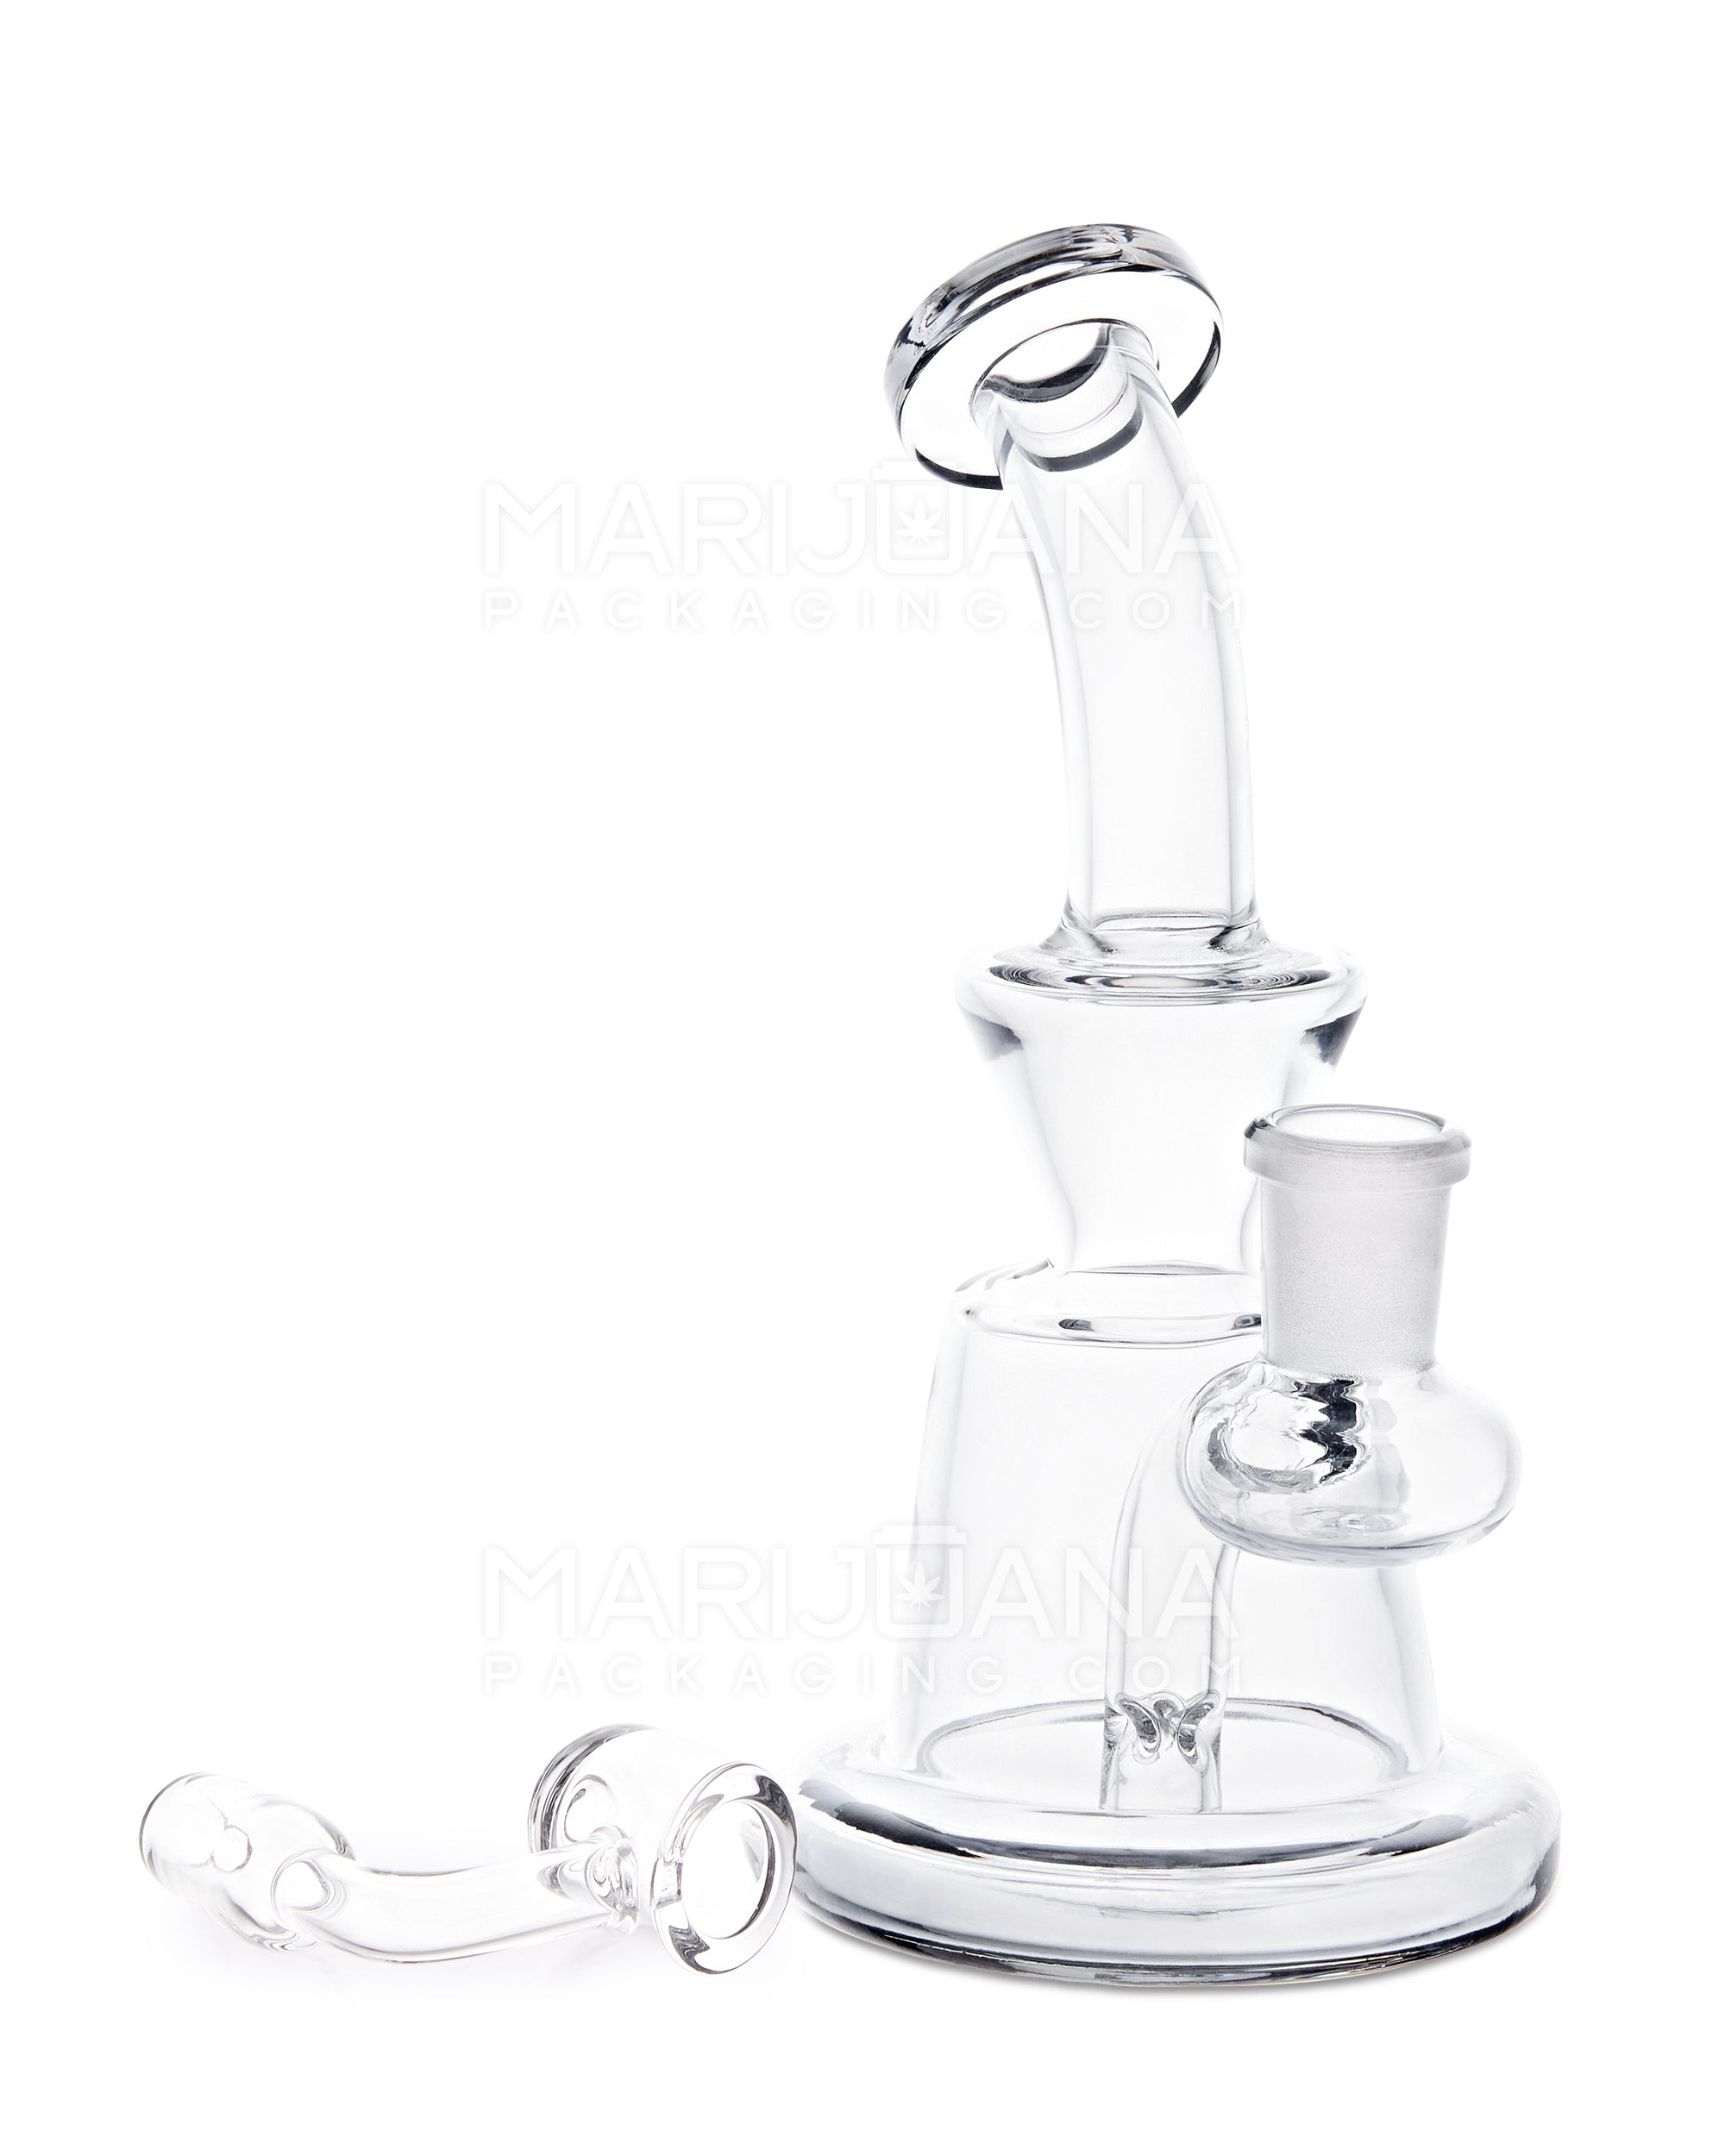 Bent Neck Iridescent Glass Dab Rig | 6in Tall - 14mm Banger - Smoke